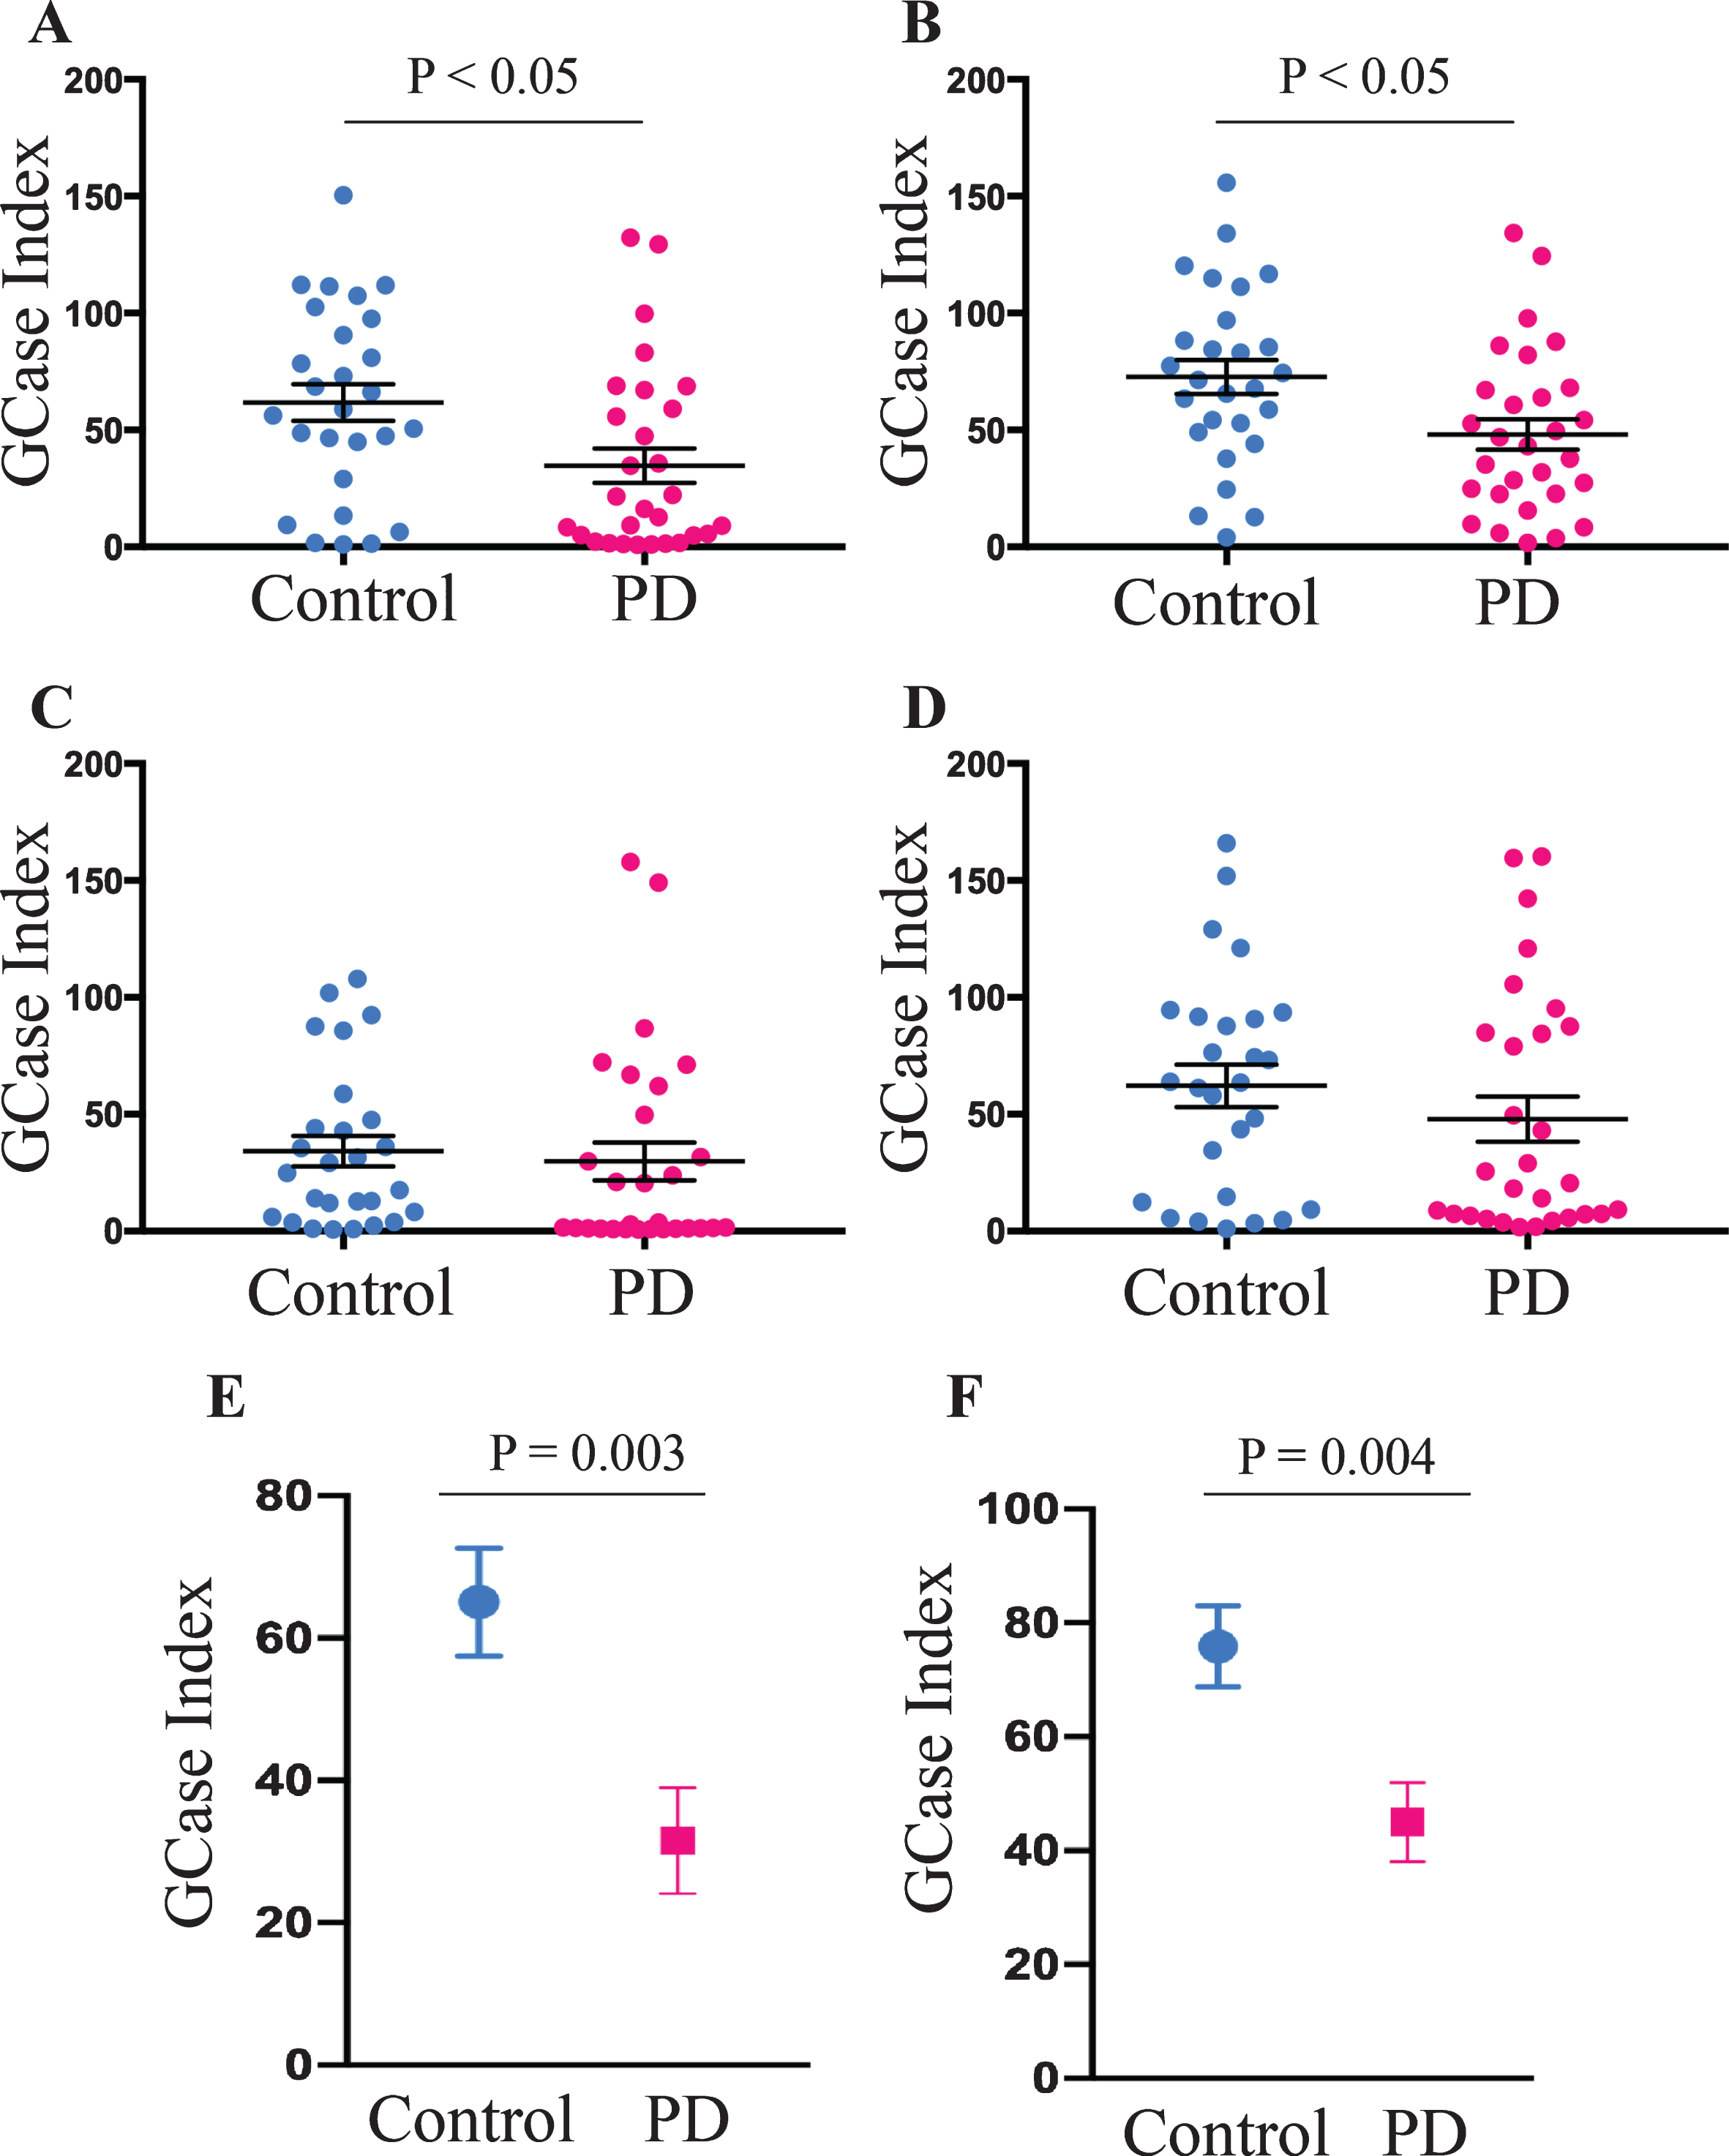 Reduced GCase activity in PD patient monocytes. Student’s t-test was used to compare monocyte GCase activity between PD (n = 29) and control (n = 27) subjects in total (CD14+) (A), classical (CD14++CD16-) (B), intermediate (CD14 + CD16+) (C), and non-classical (CD14lowCD16+) (D) monocyte subsets. Data are presented as the mean±SEM with each dot representing an individual participant. Multivariate analysis covarying for age, sex, the percent of monocytes in peripheral blood mononuclear cells and mononuclear cell storage time in months showed a significant reduction in GCase activity in PD patient total (E) and classical (F) monocytes. Data are presented as the estimated marginal mean±SEM.